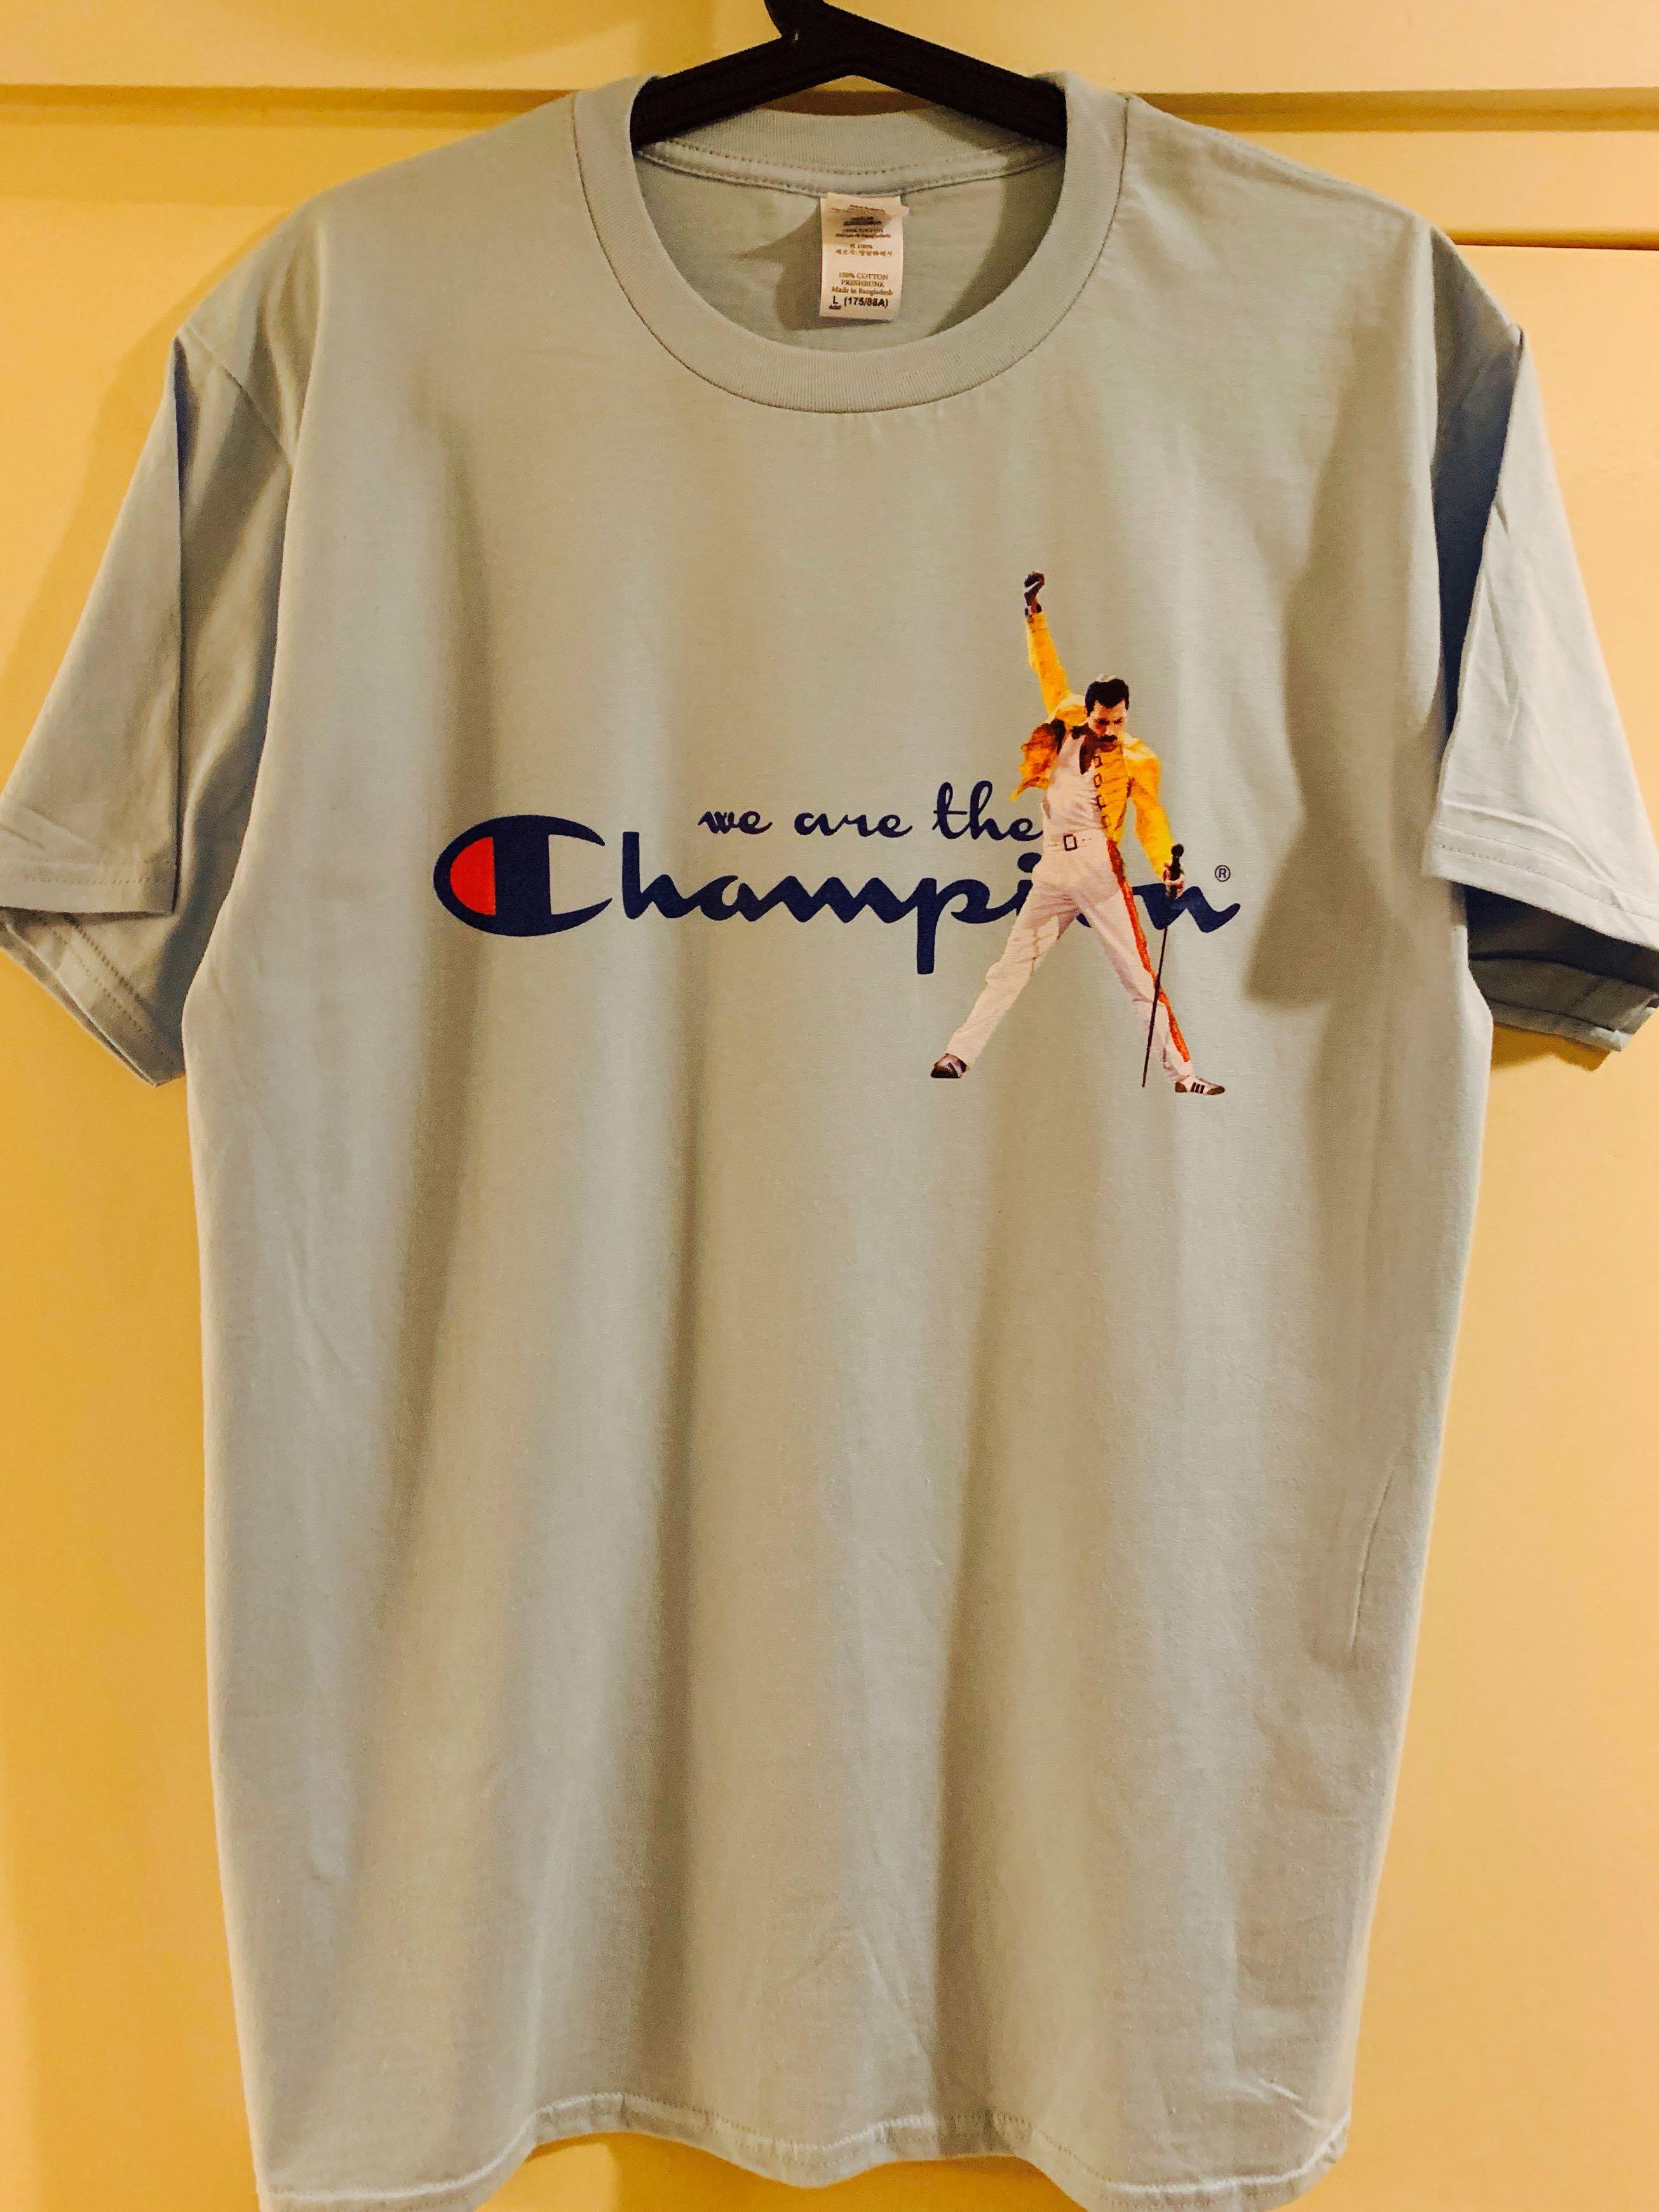 we are the champion shirt